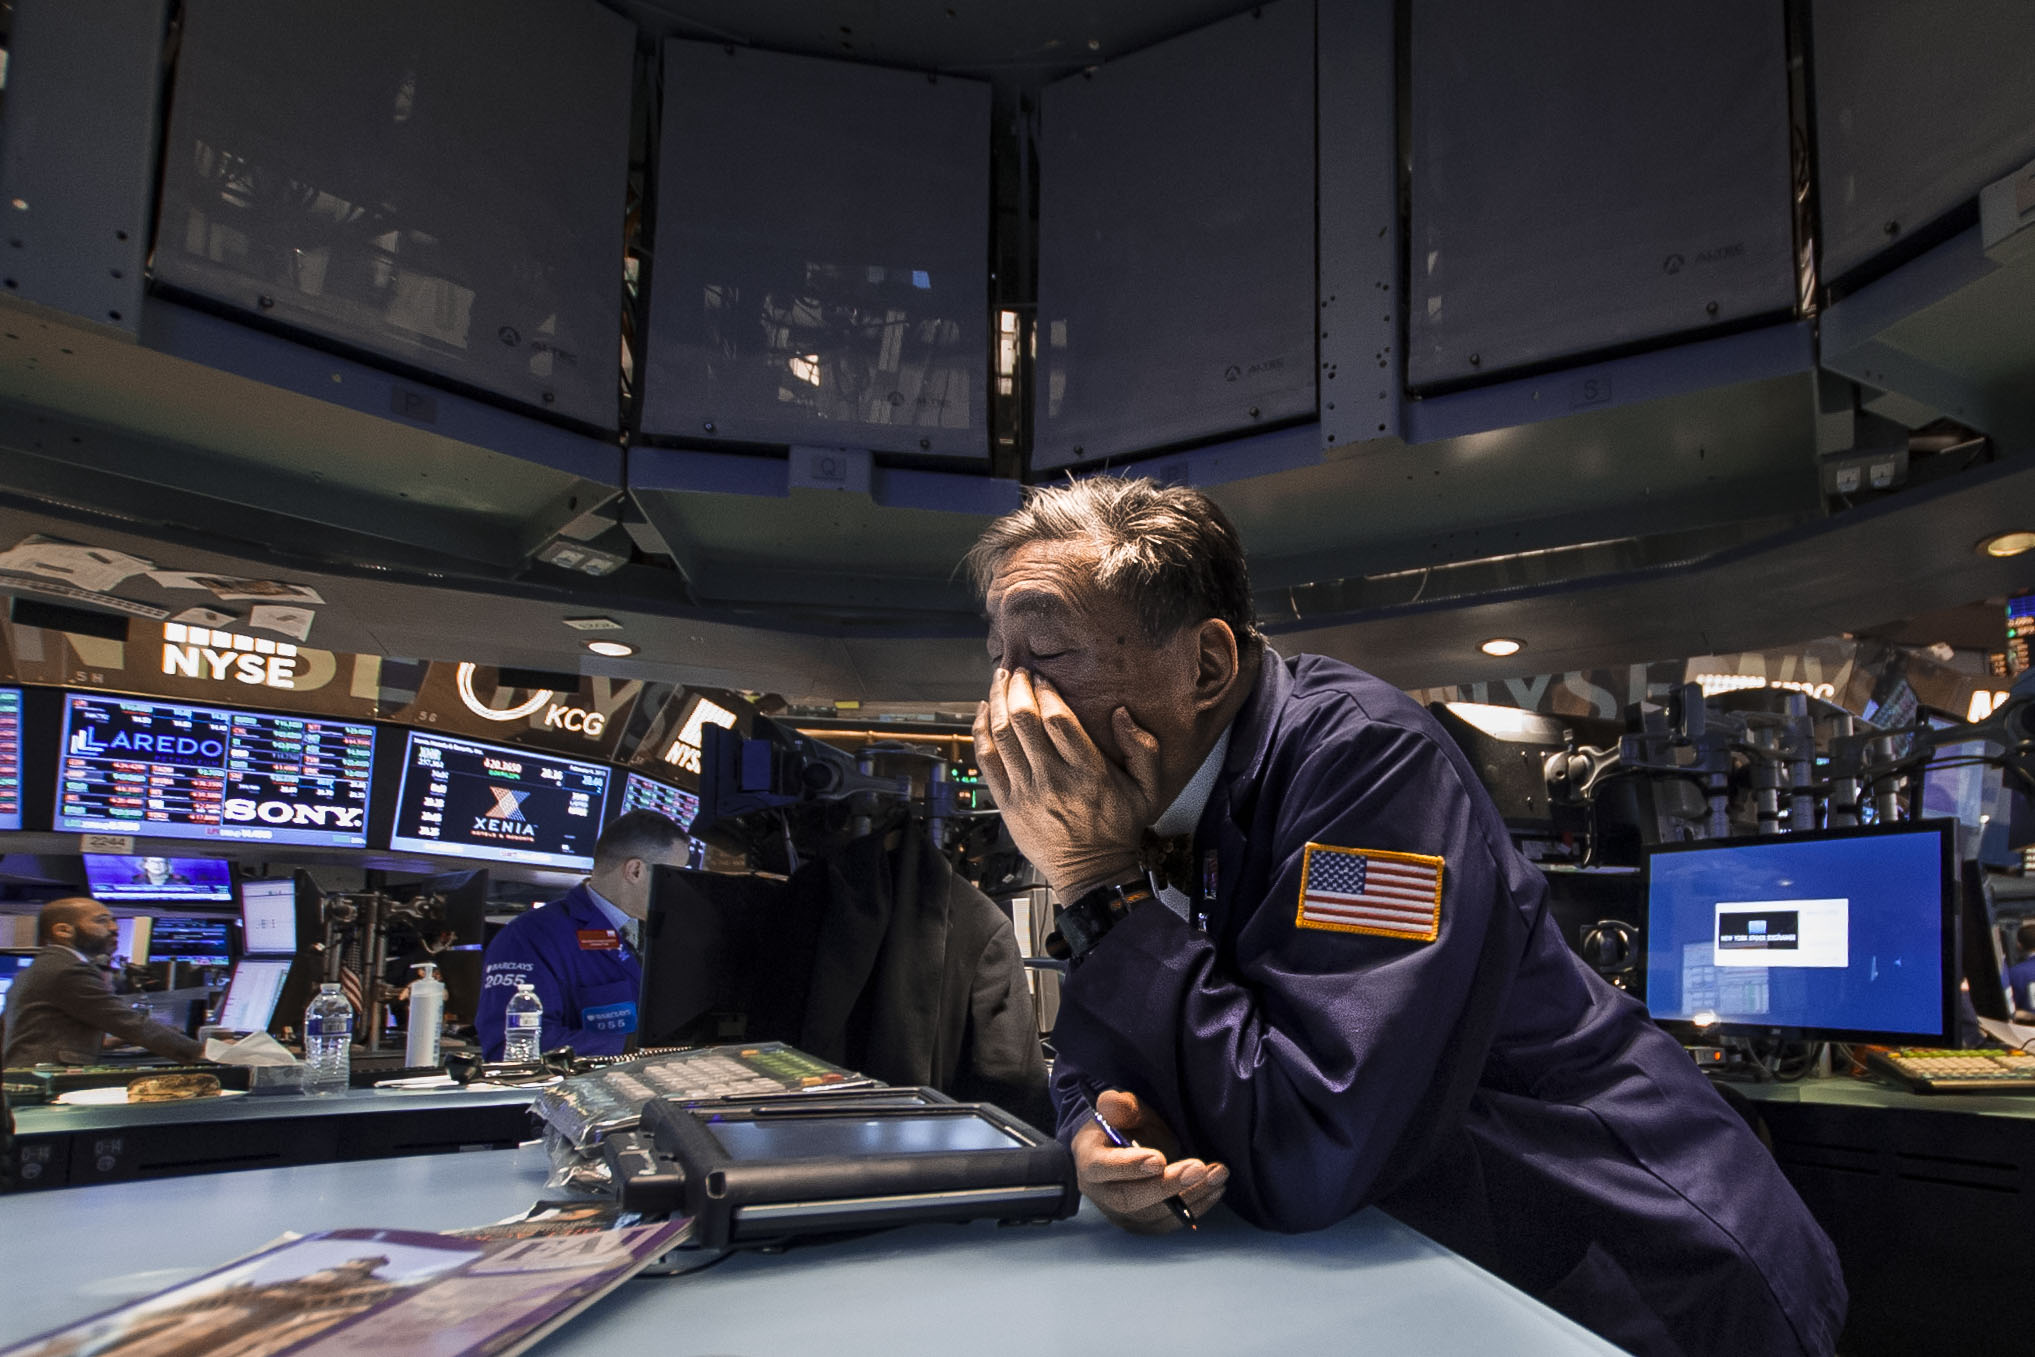  A floor trader rubs his eyes after a long day. 